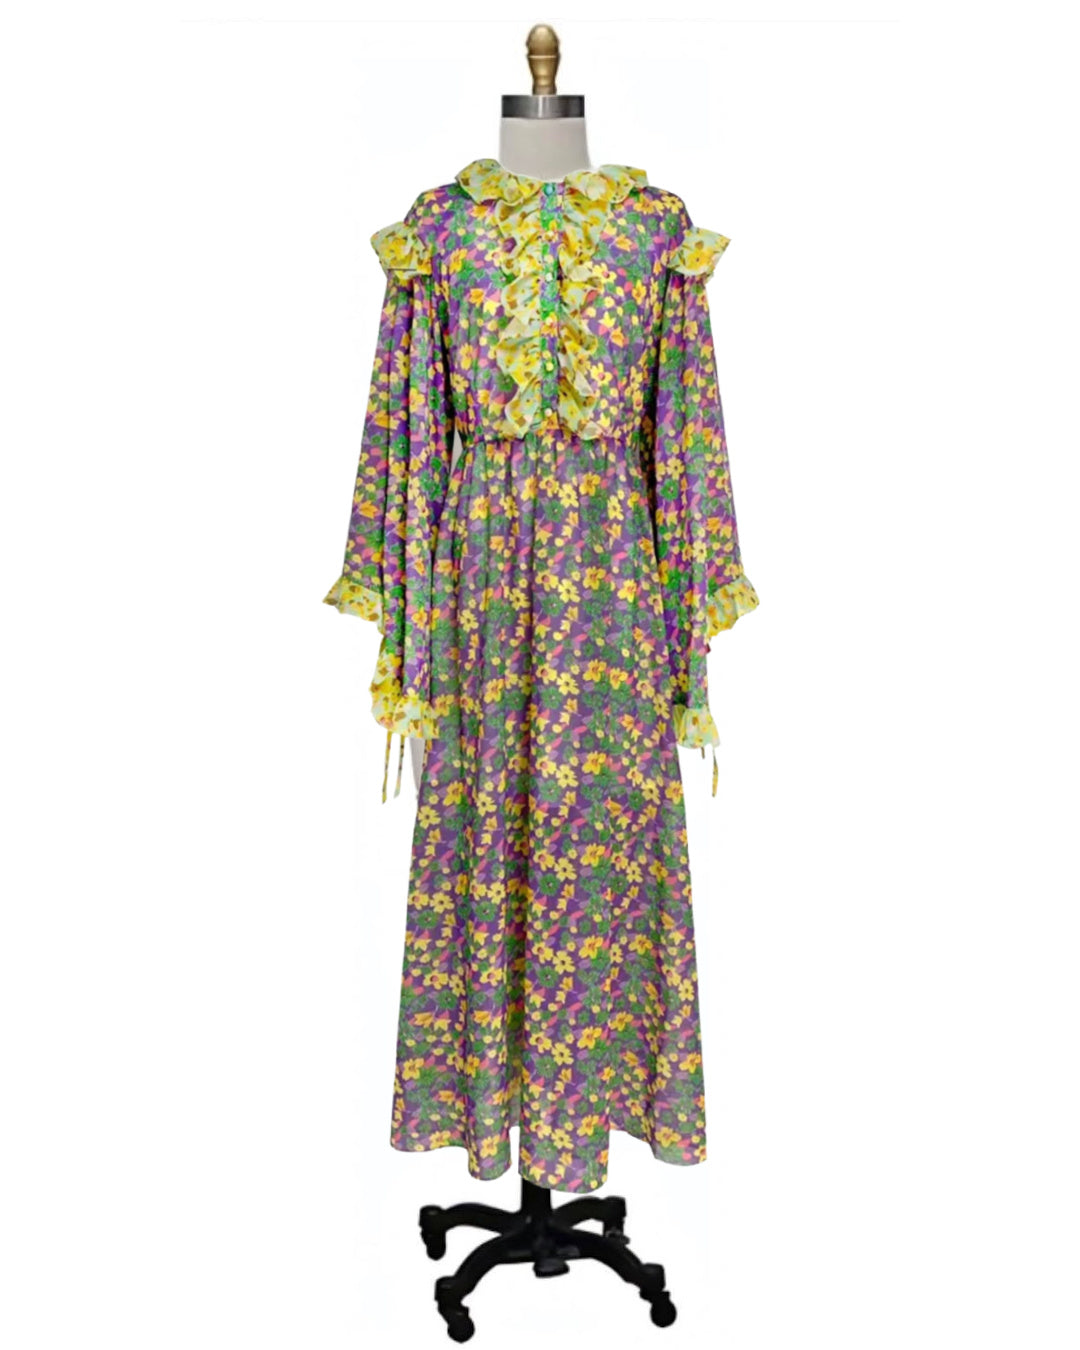 Lori- the Hippie Chic Bright Floral Print Angel Wing Sleeve Maxi Dress